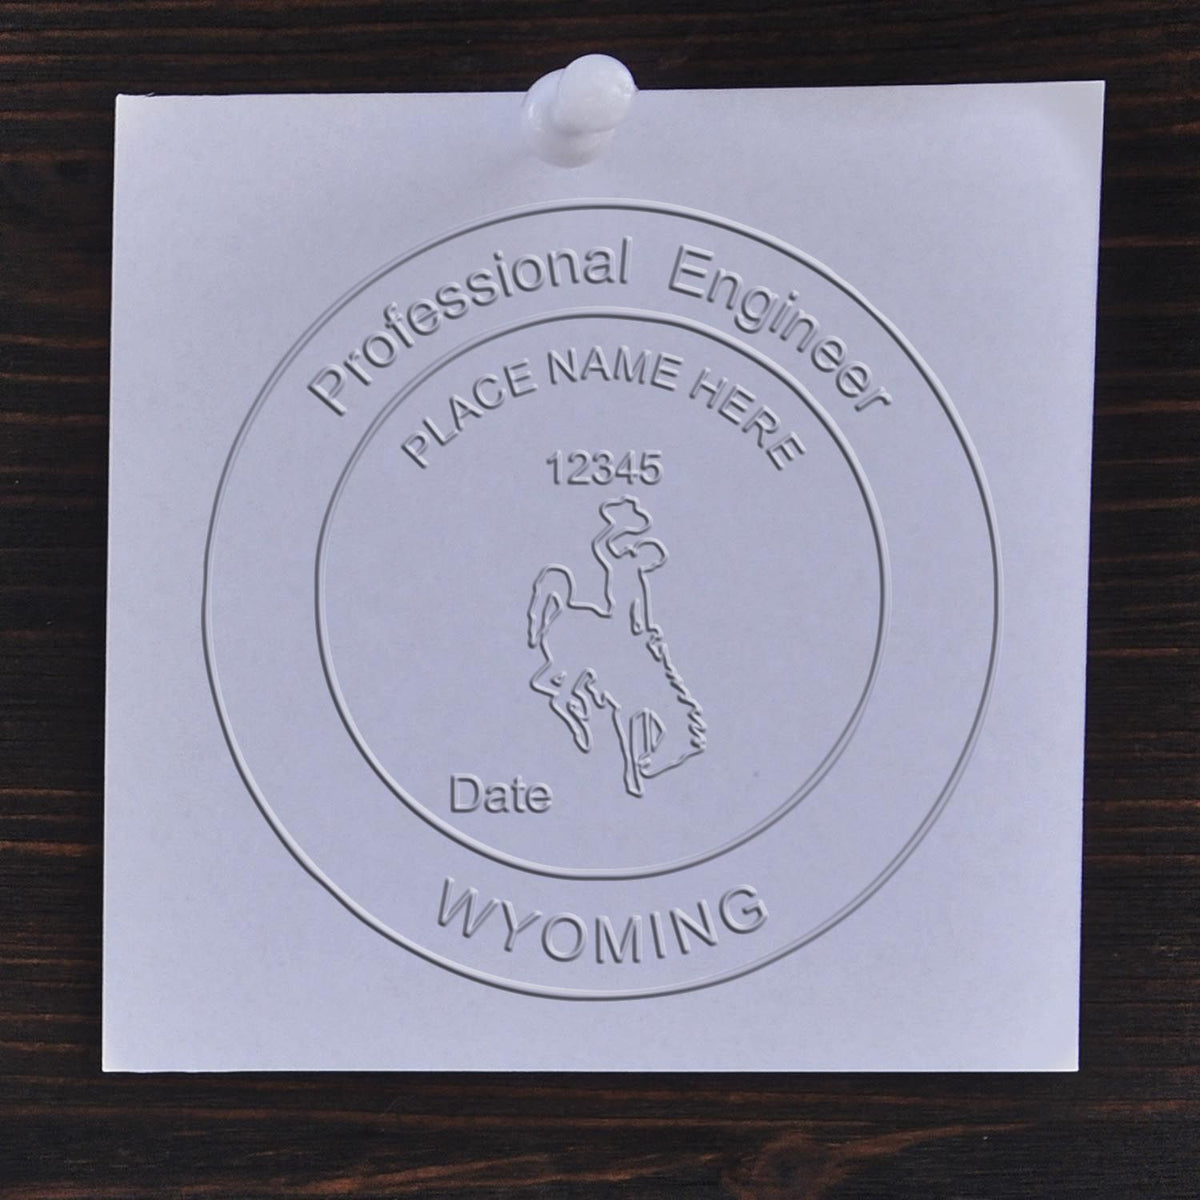 The Gift Wyoming Engineer Seal stamp impression comes to life with a crisp, detailed image stamped on paper - showcasing true professional quality.